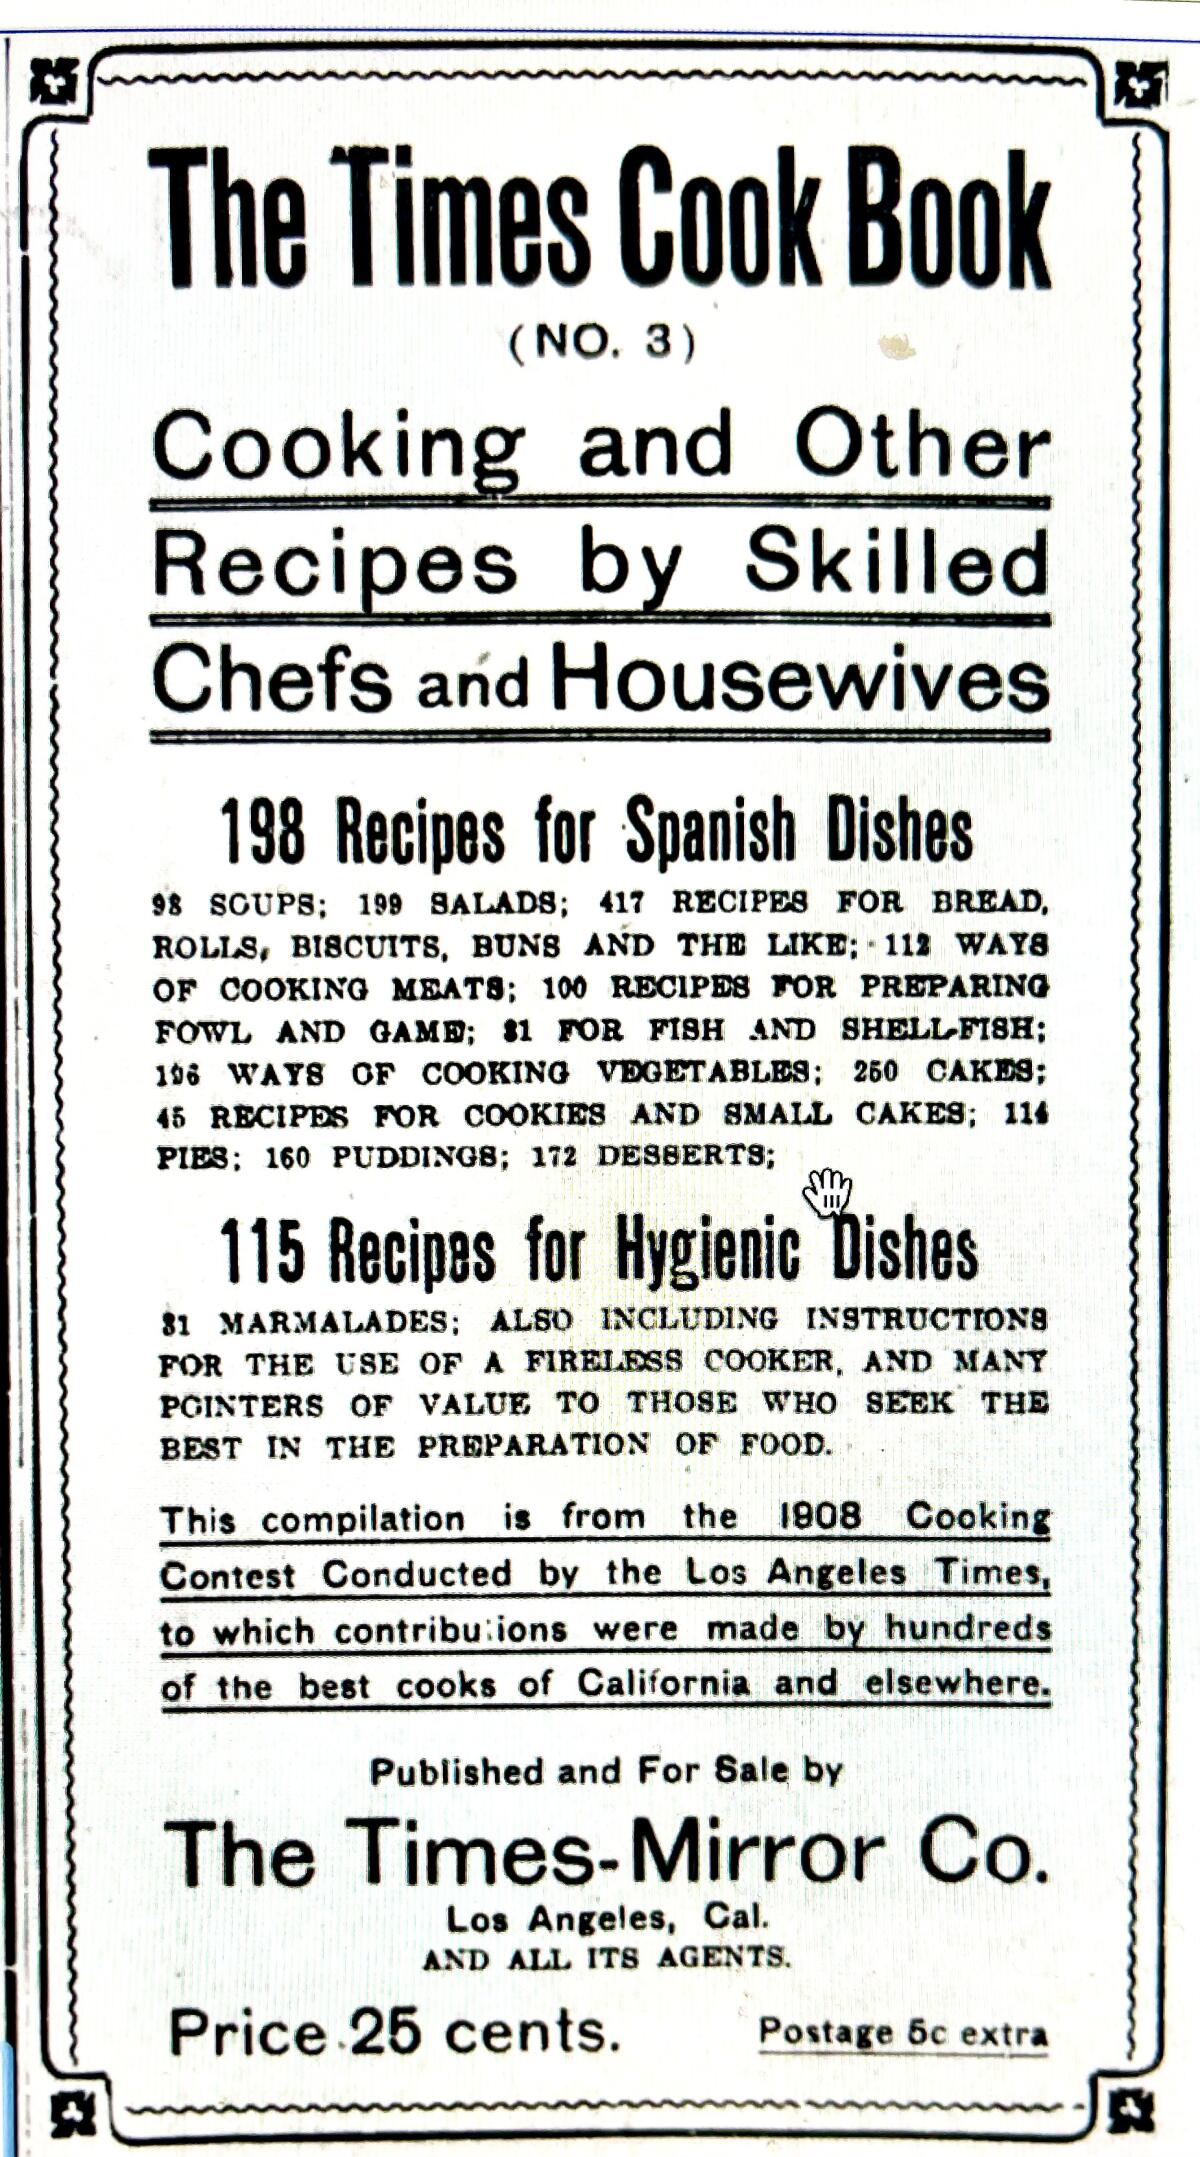 An ad in a 1909 edition of the Los Angeles Times for "The Times Cook Book No. 3" by "skilled chefs and housewives."